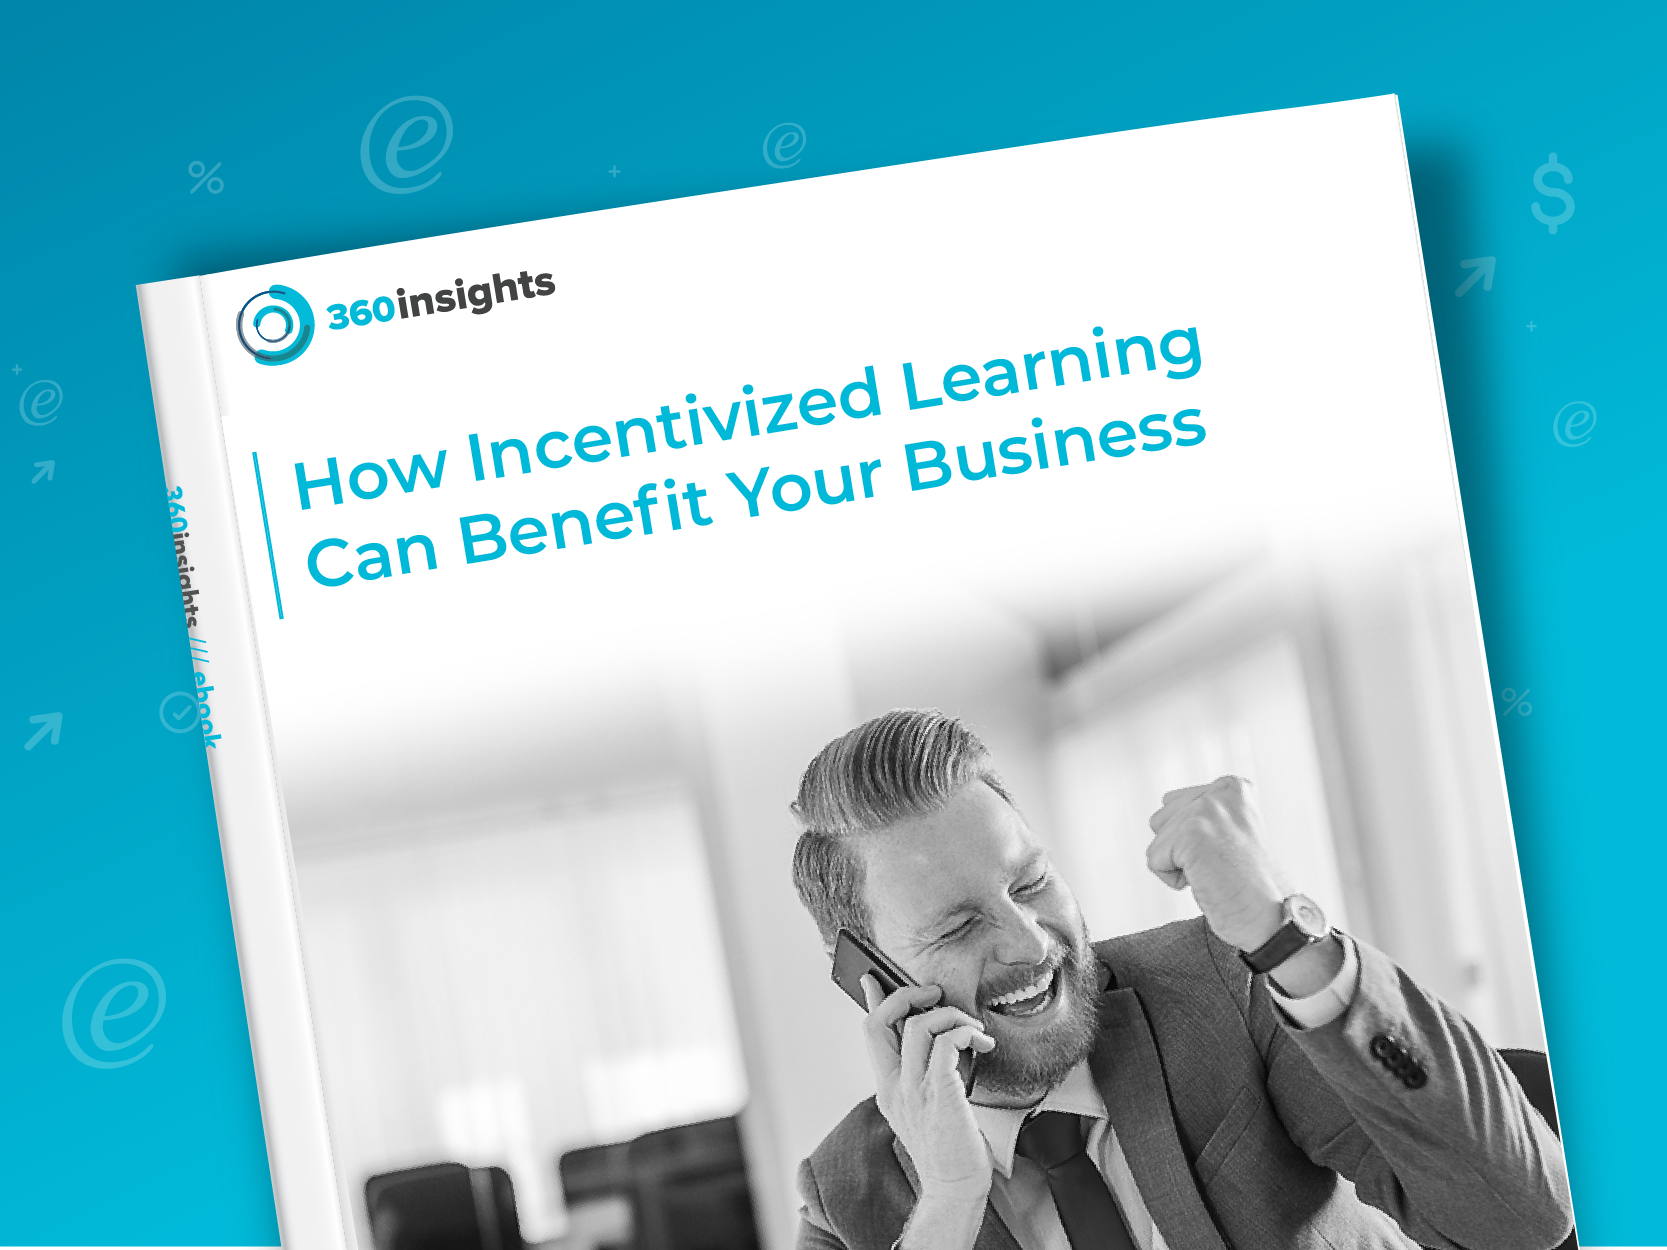 eBook about how incentivized learning can benefit your business